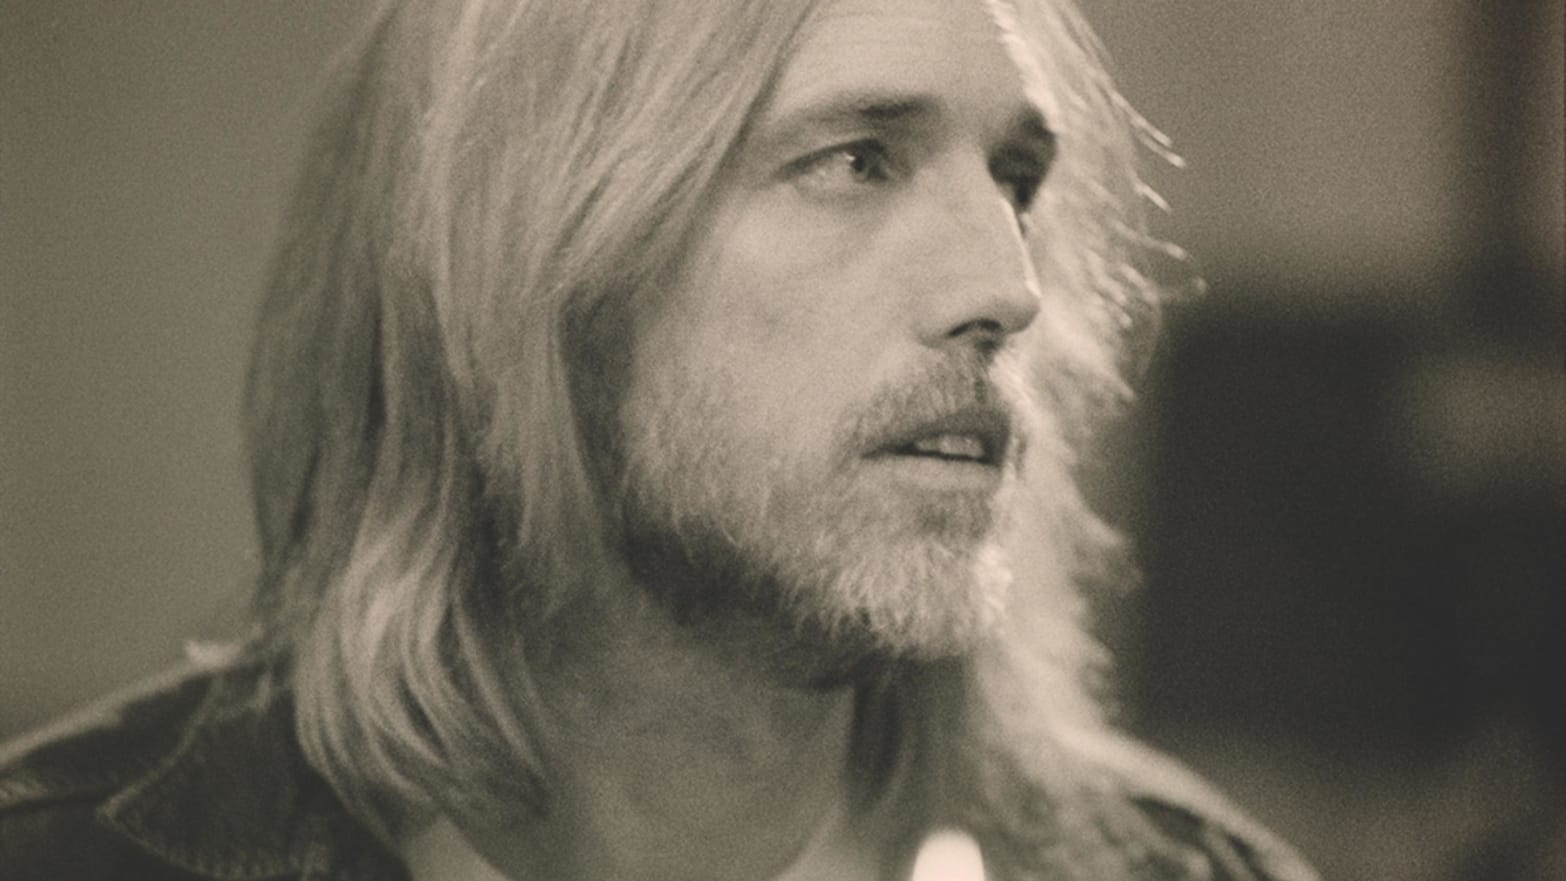 Tom Petty's Iconic Blonde Hair - wide 5